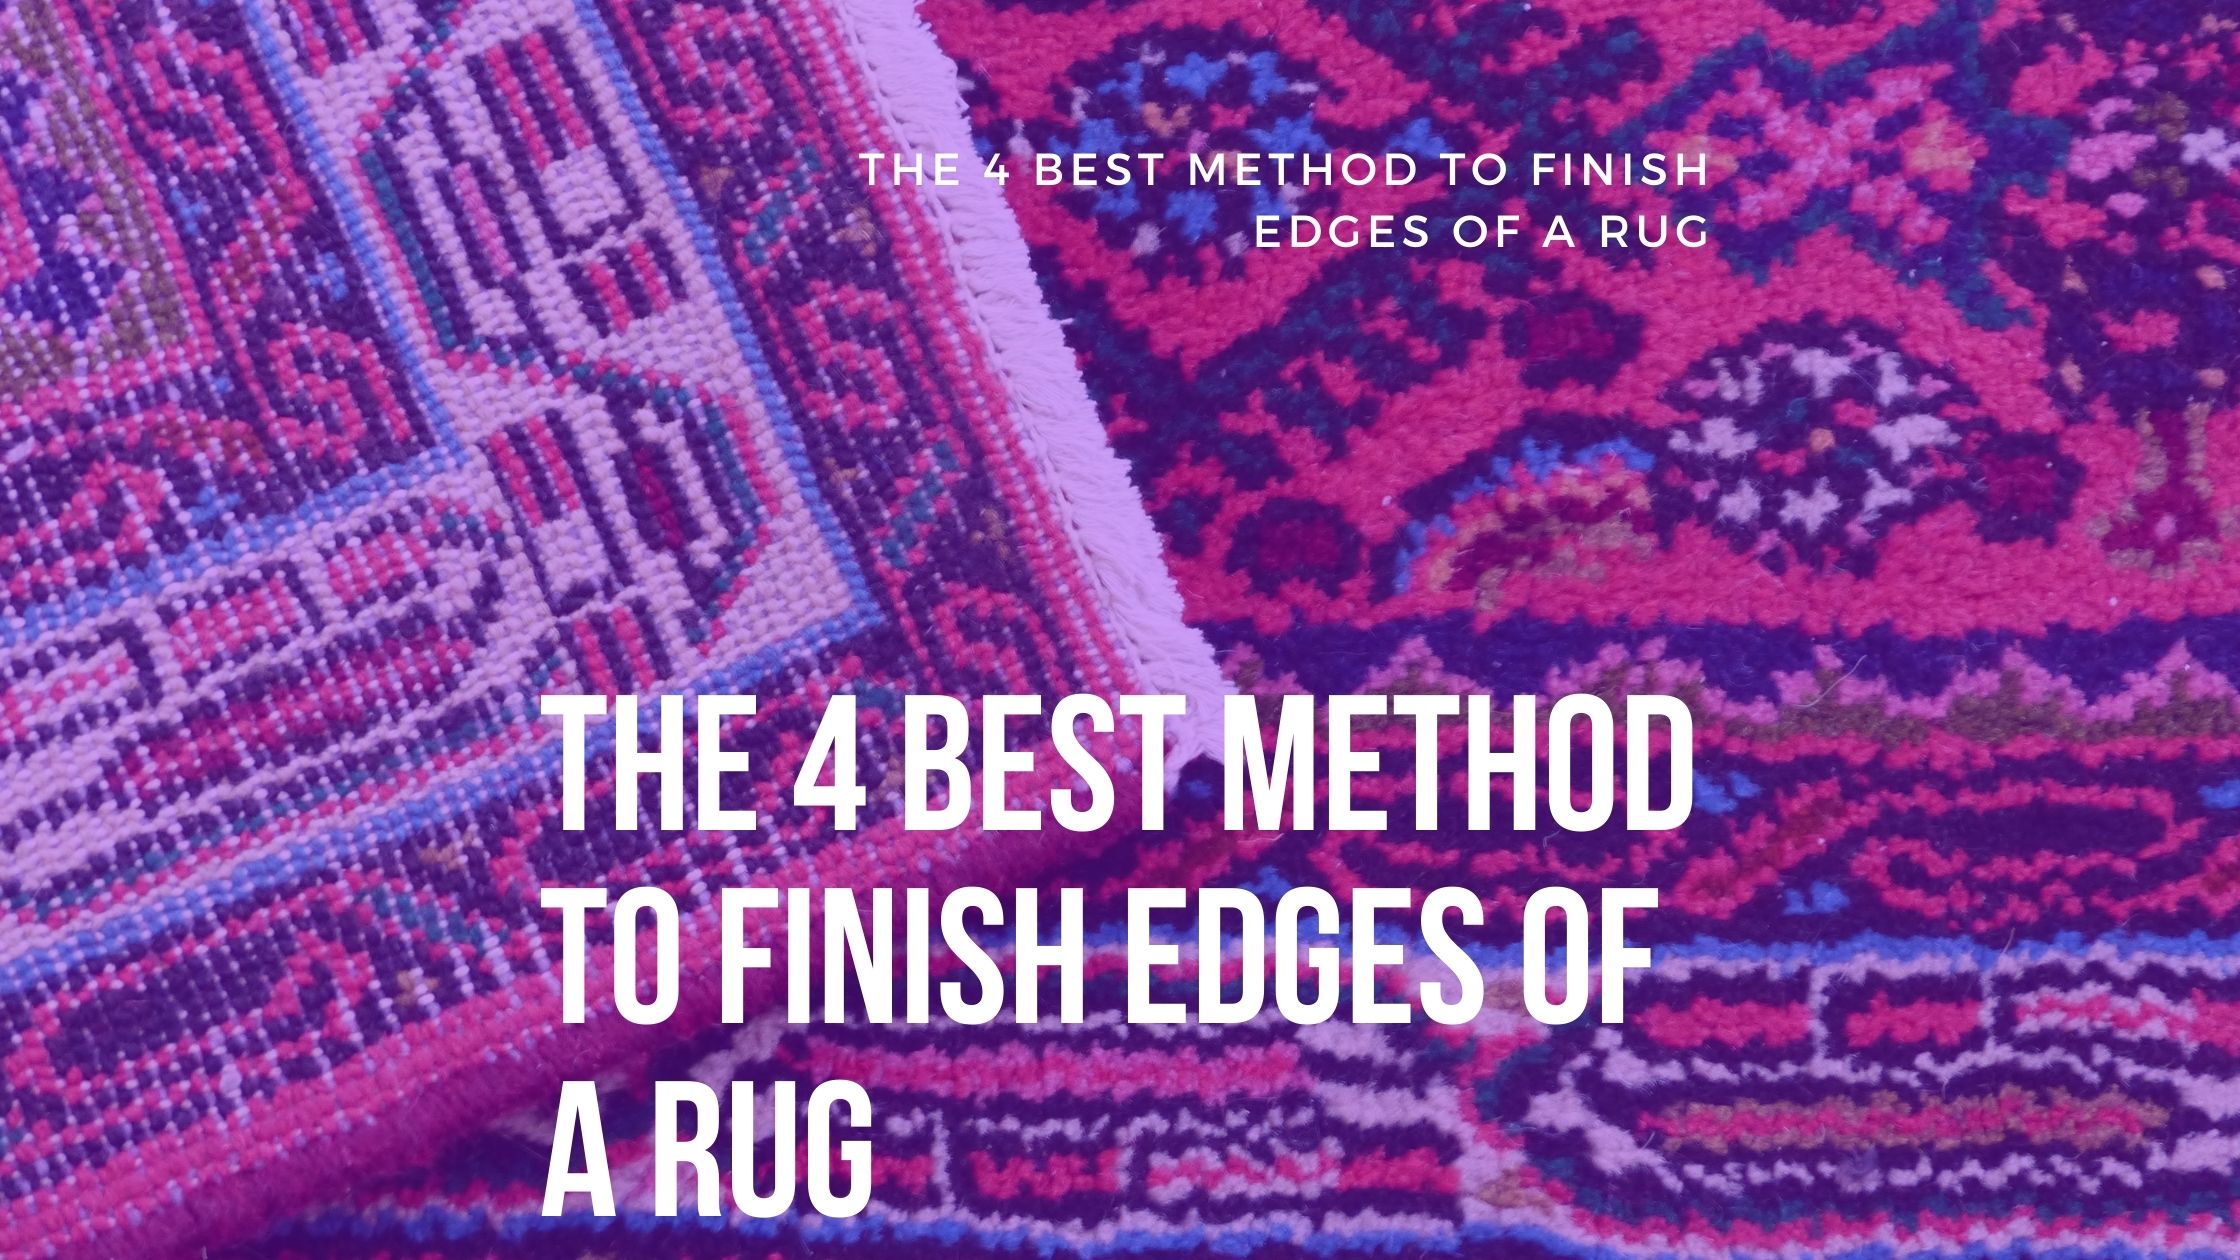 The 4 Best Method To Finish Edges Of A Rug